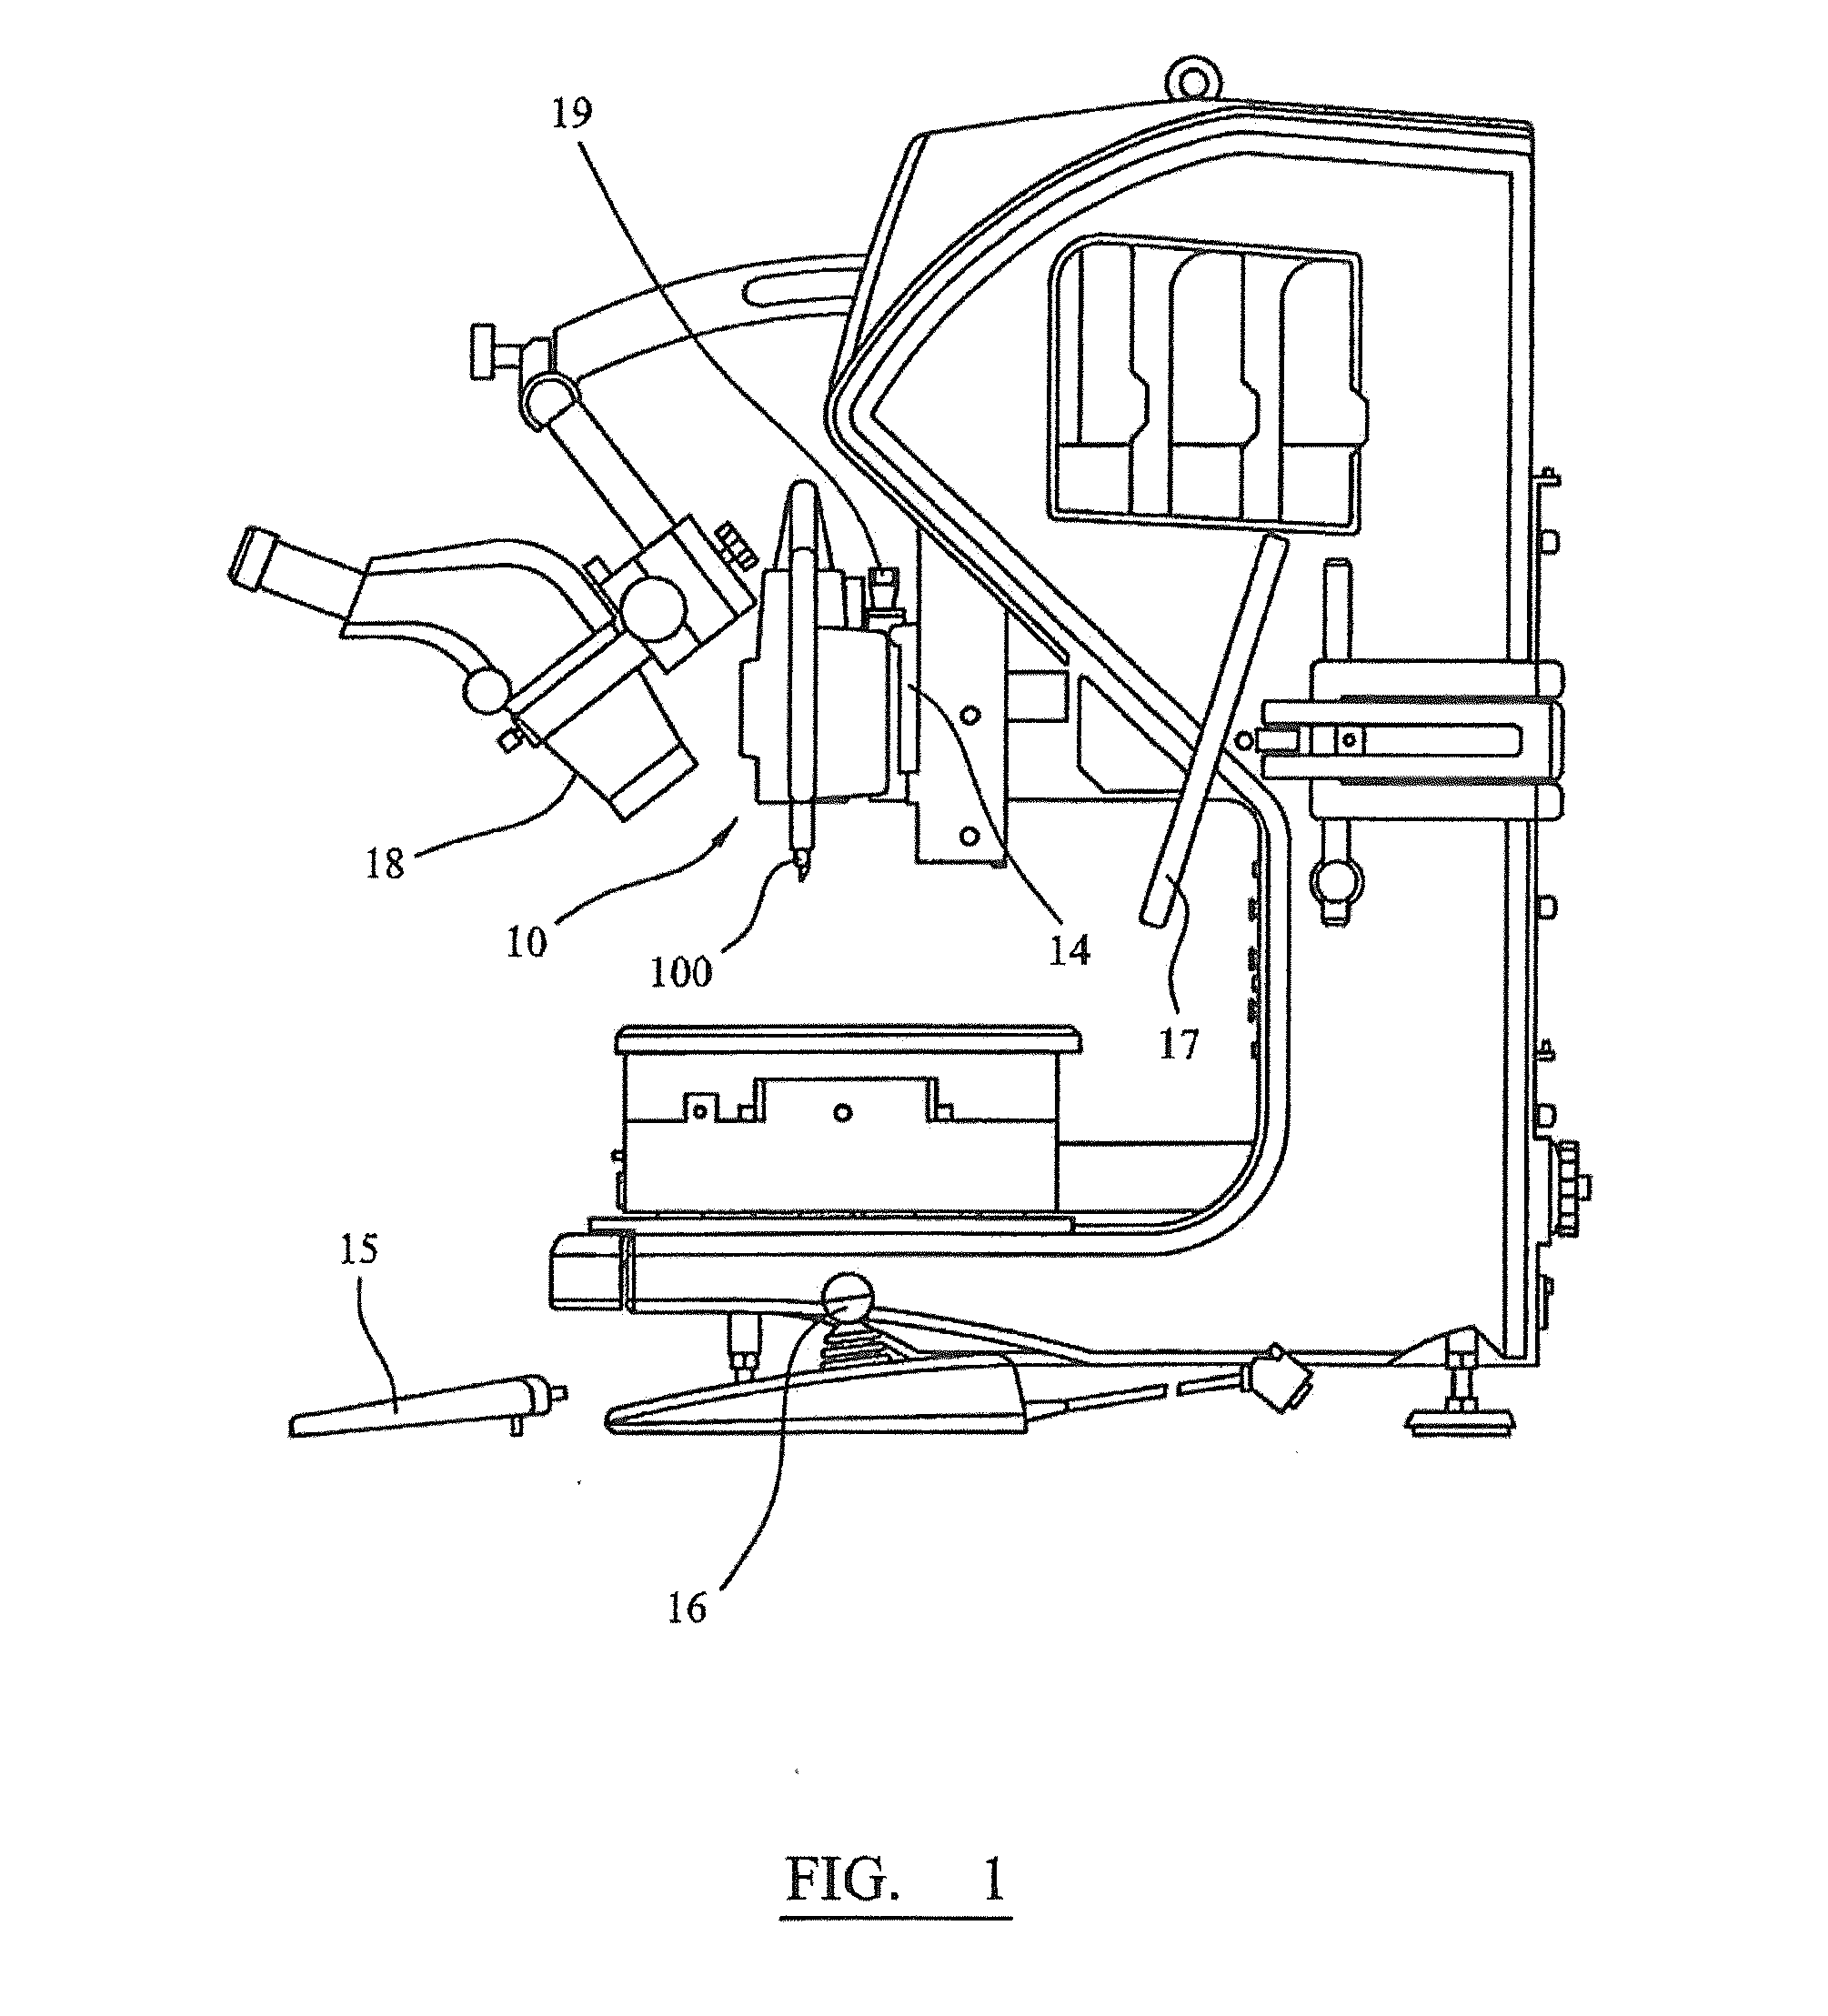 Bond testing machine and cartridge for a bond testing machine comprising a plurality of test tools